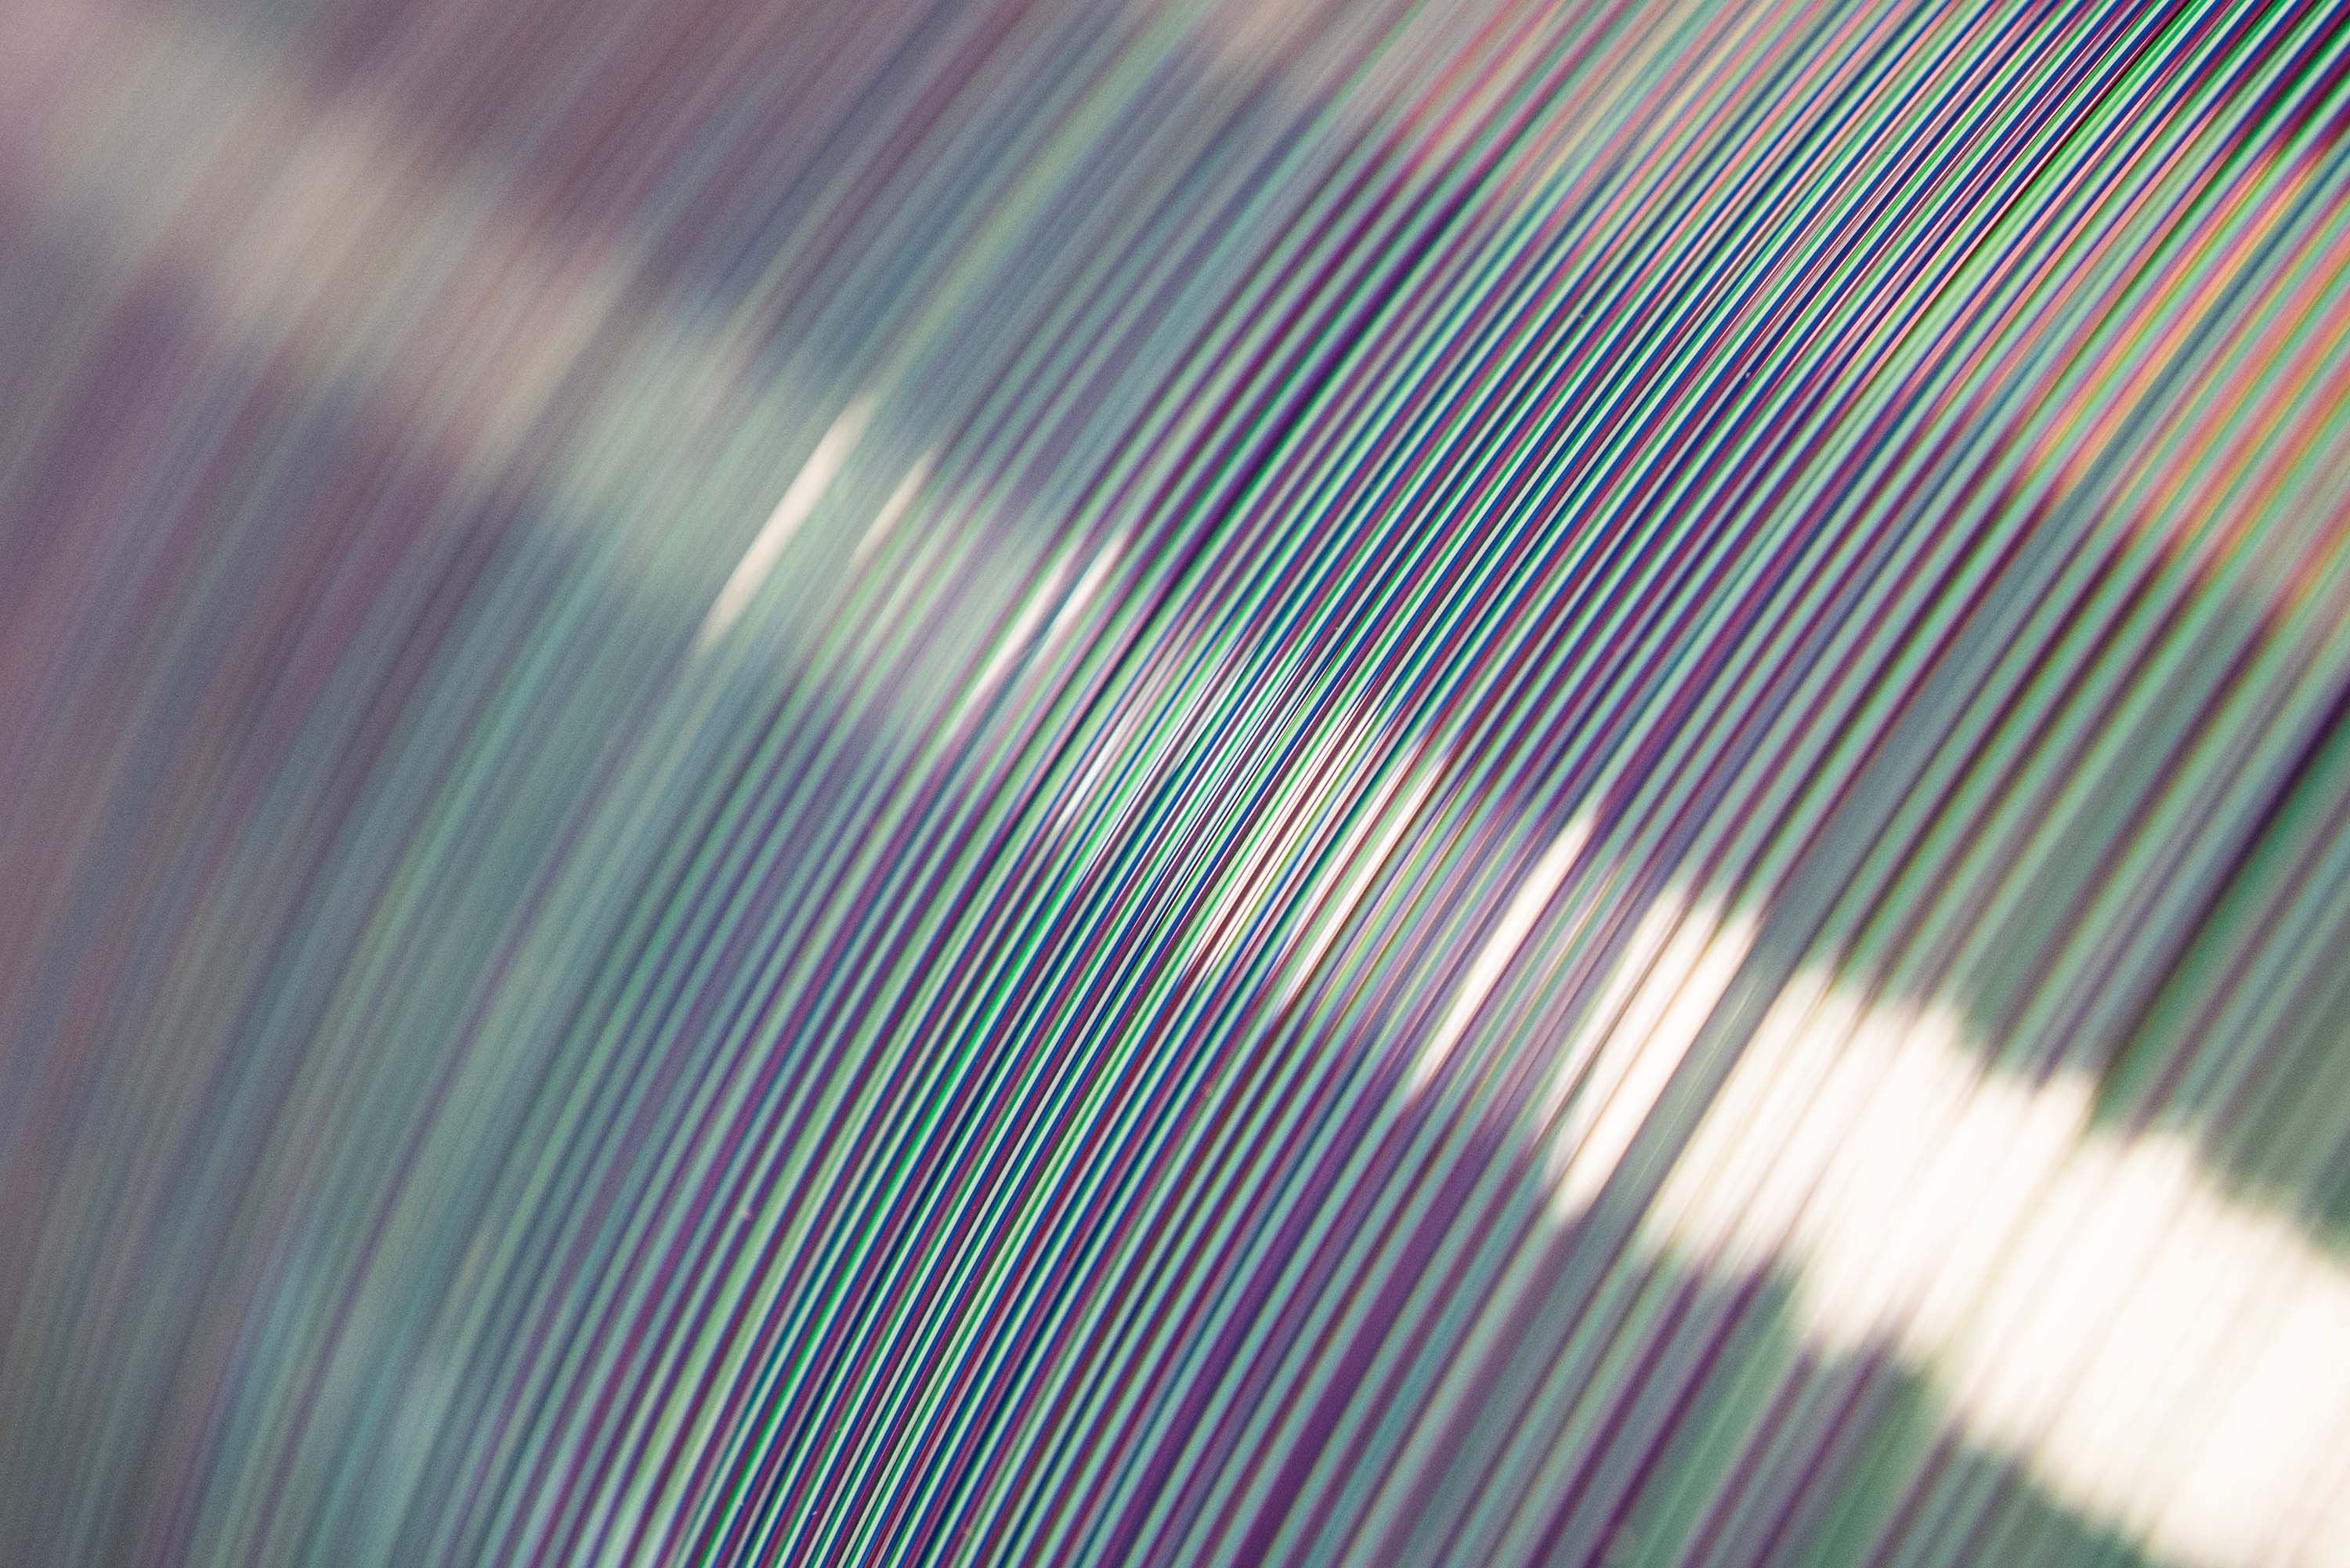 Close-up of a curved surface with parallel lines in green, red, blue, and white, creating a textured pattern with light reflections.